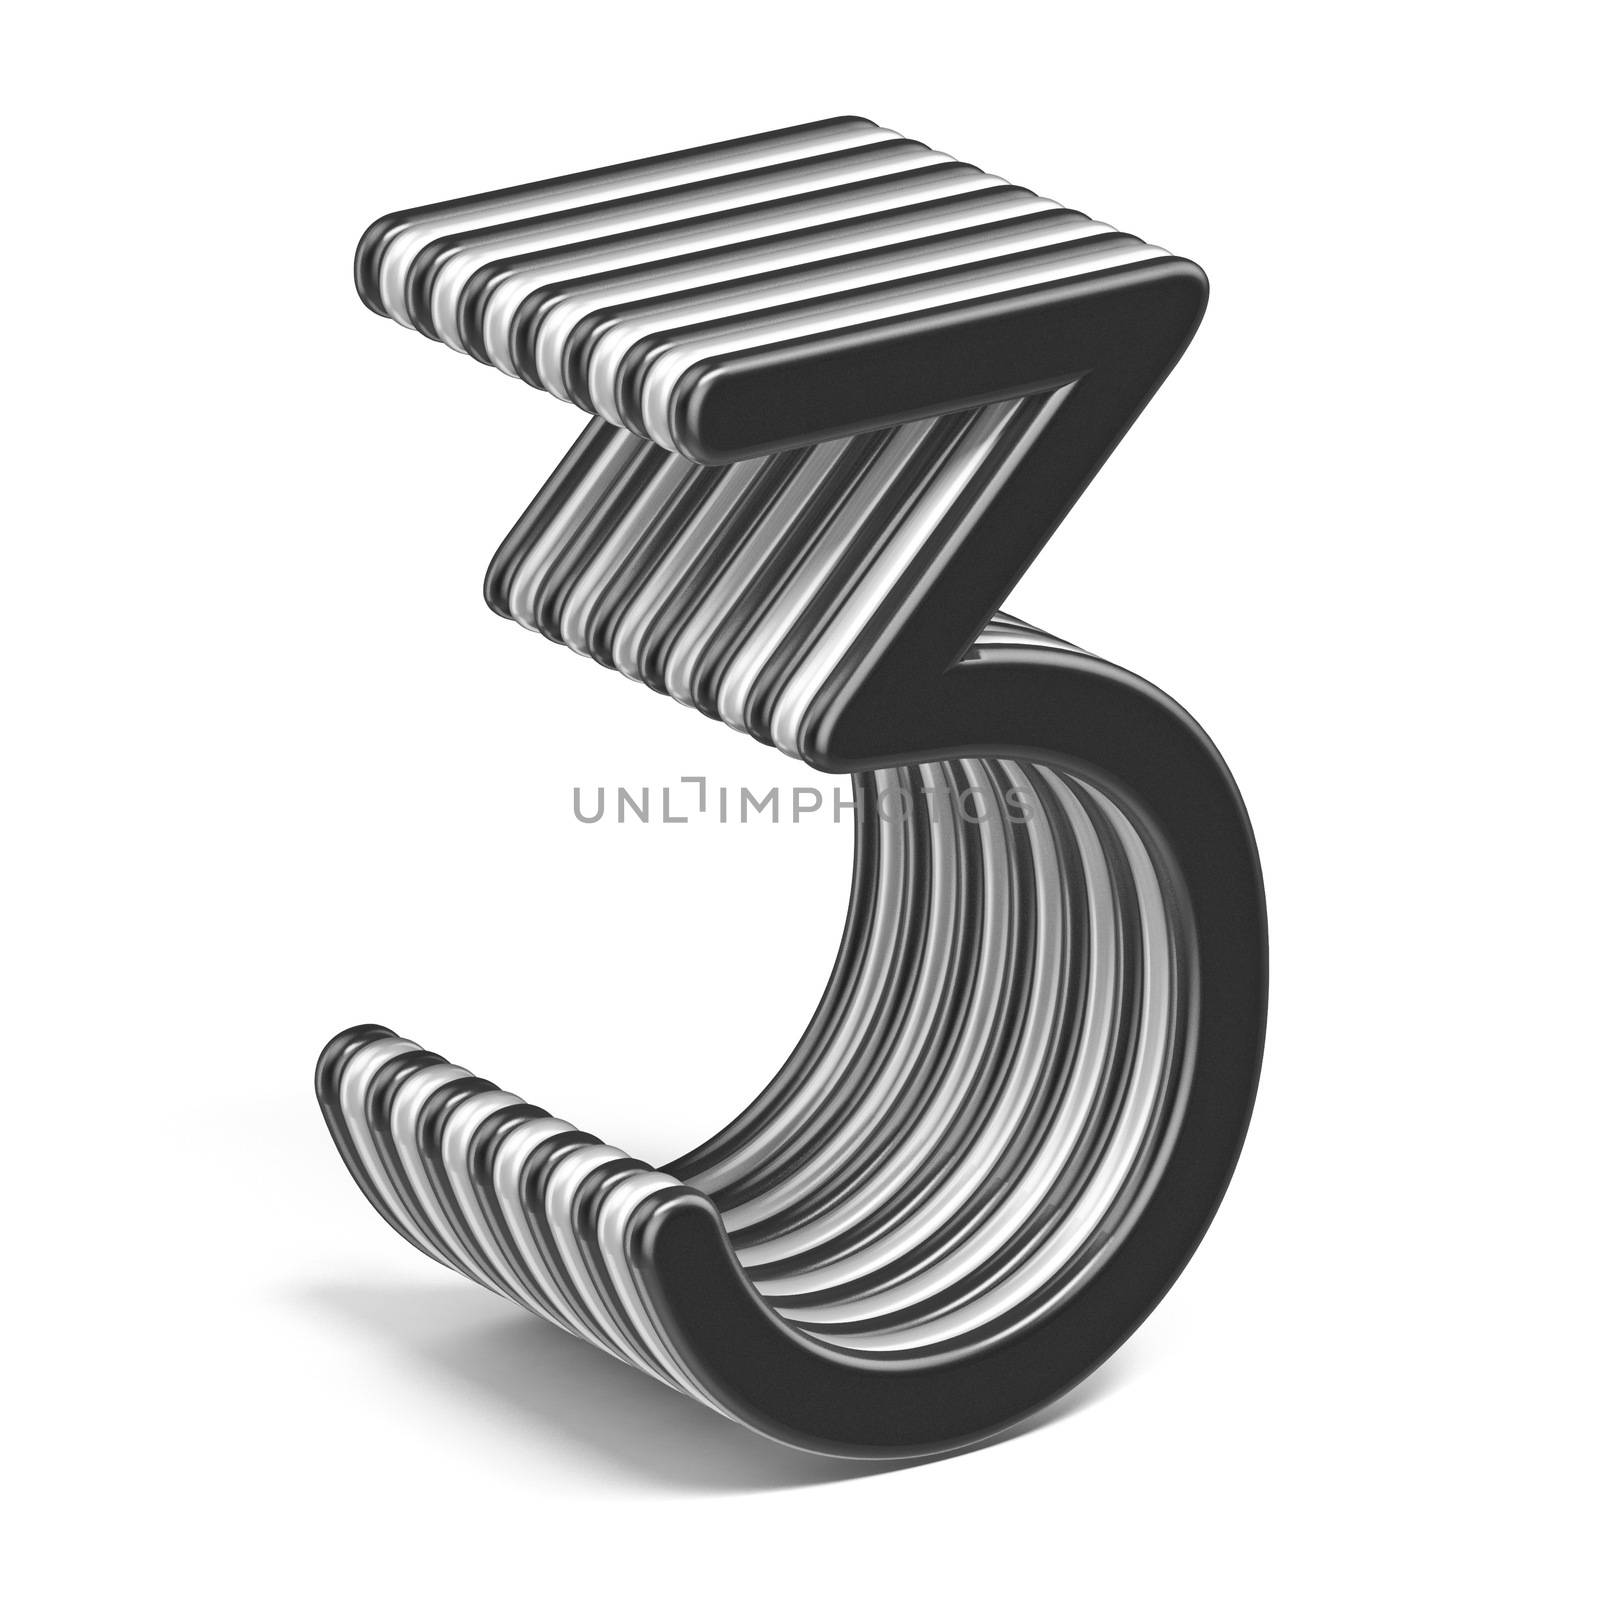 Black and white layered Number 3 THREE 3D render illustration isolated on white background